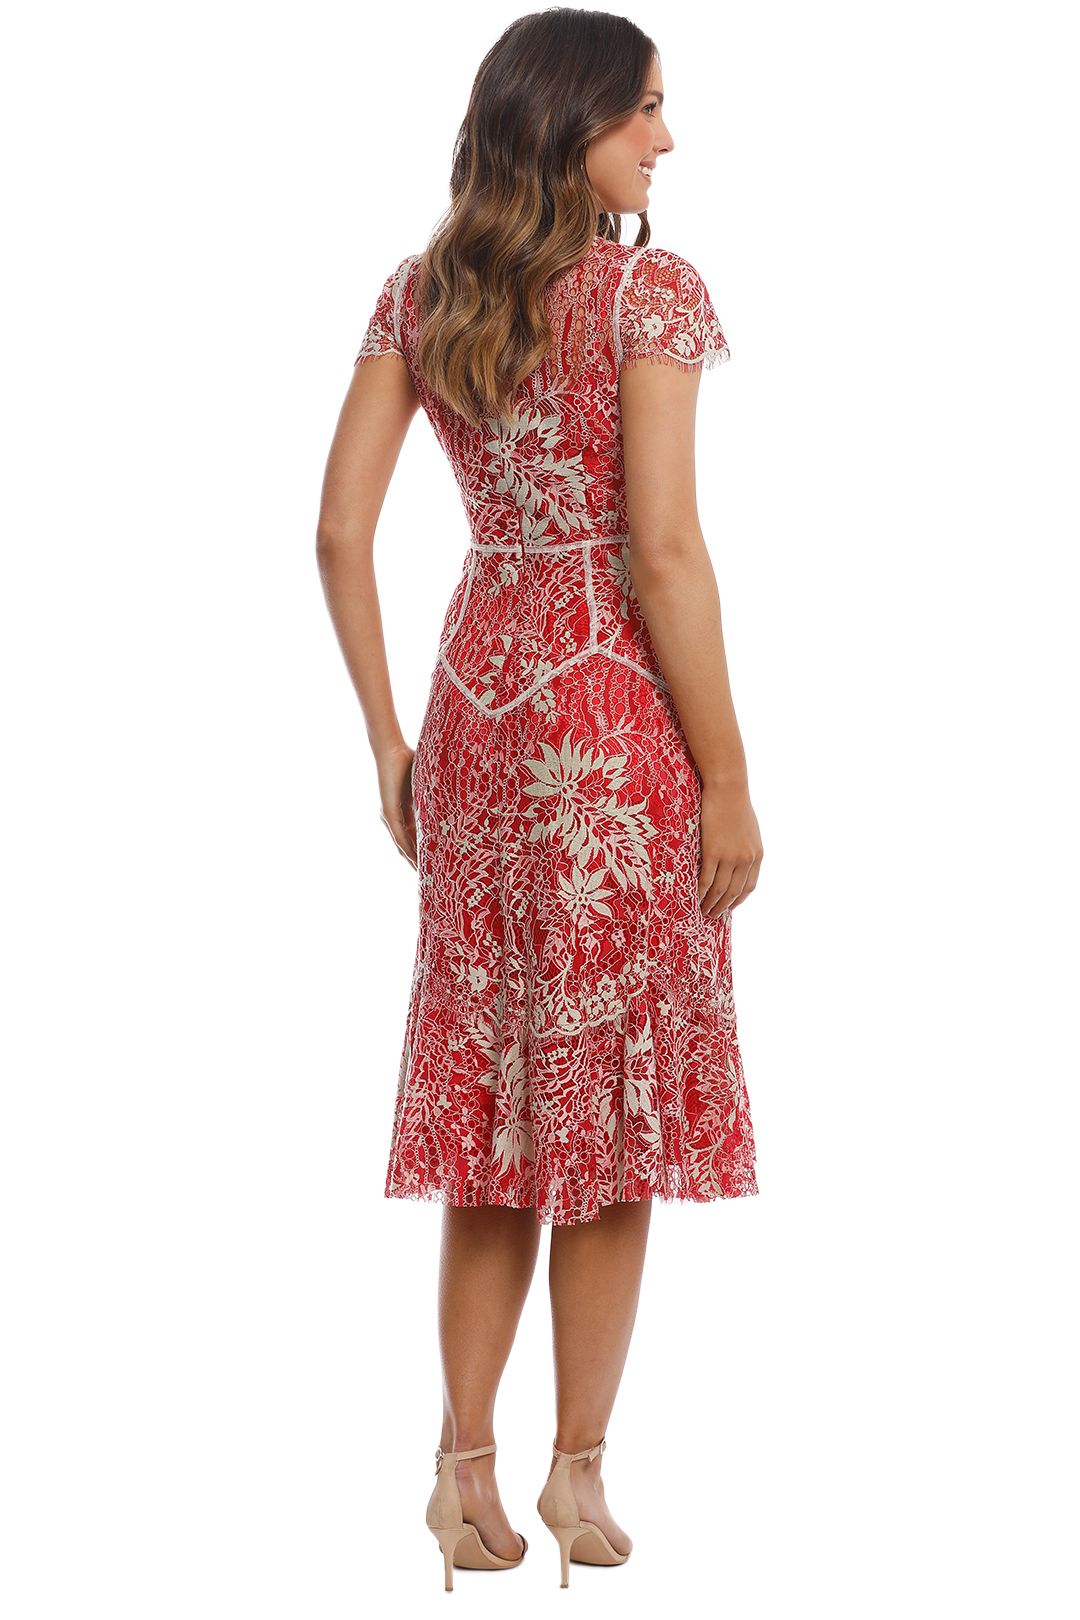 Moss and Spy - Annika High Neck Dress - Red - Back